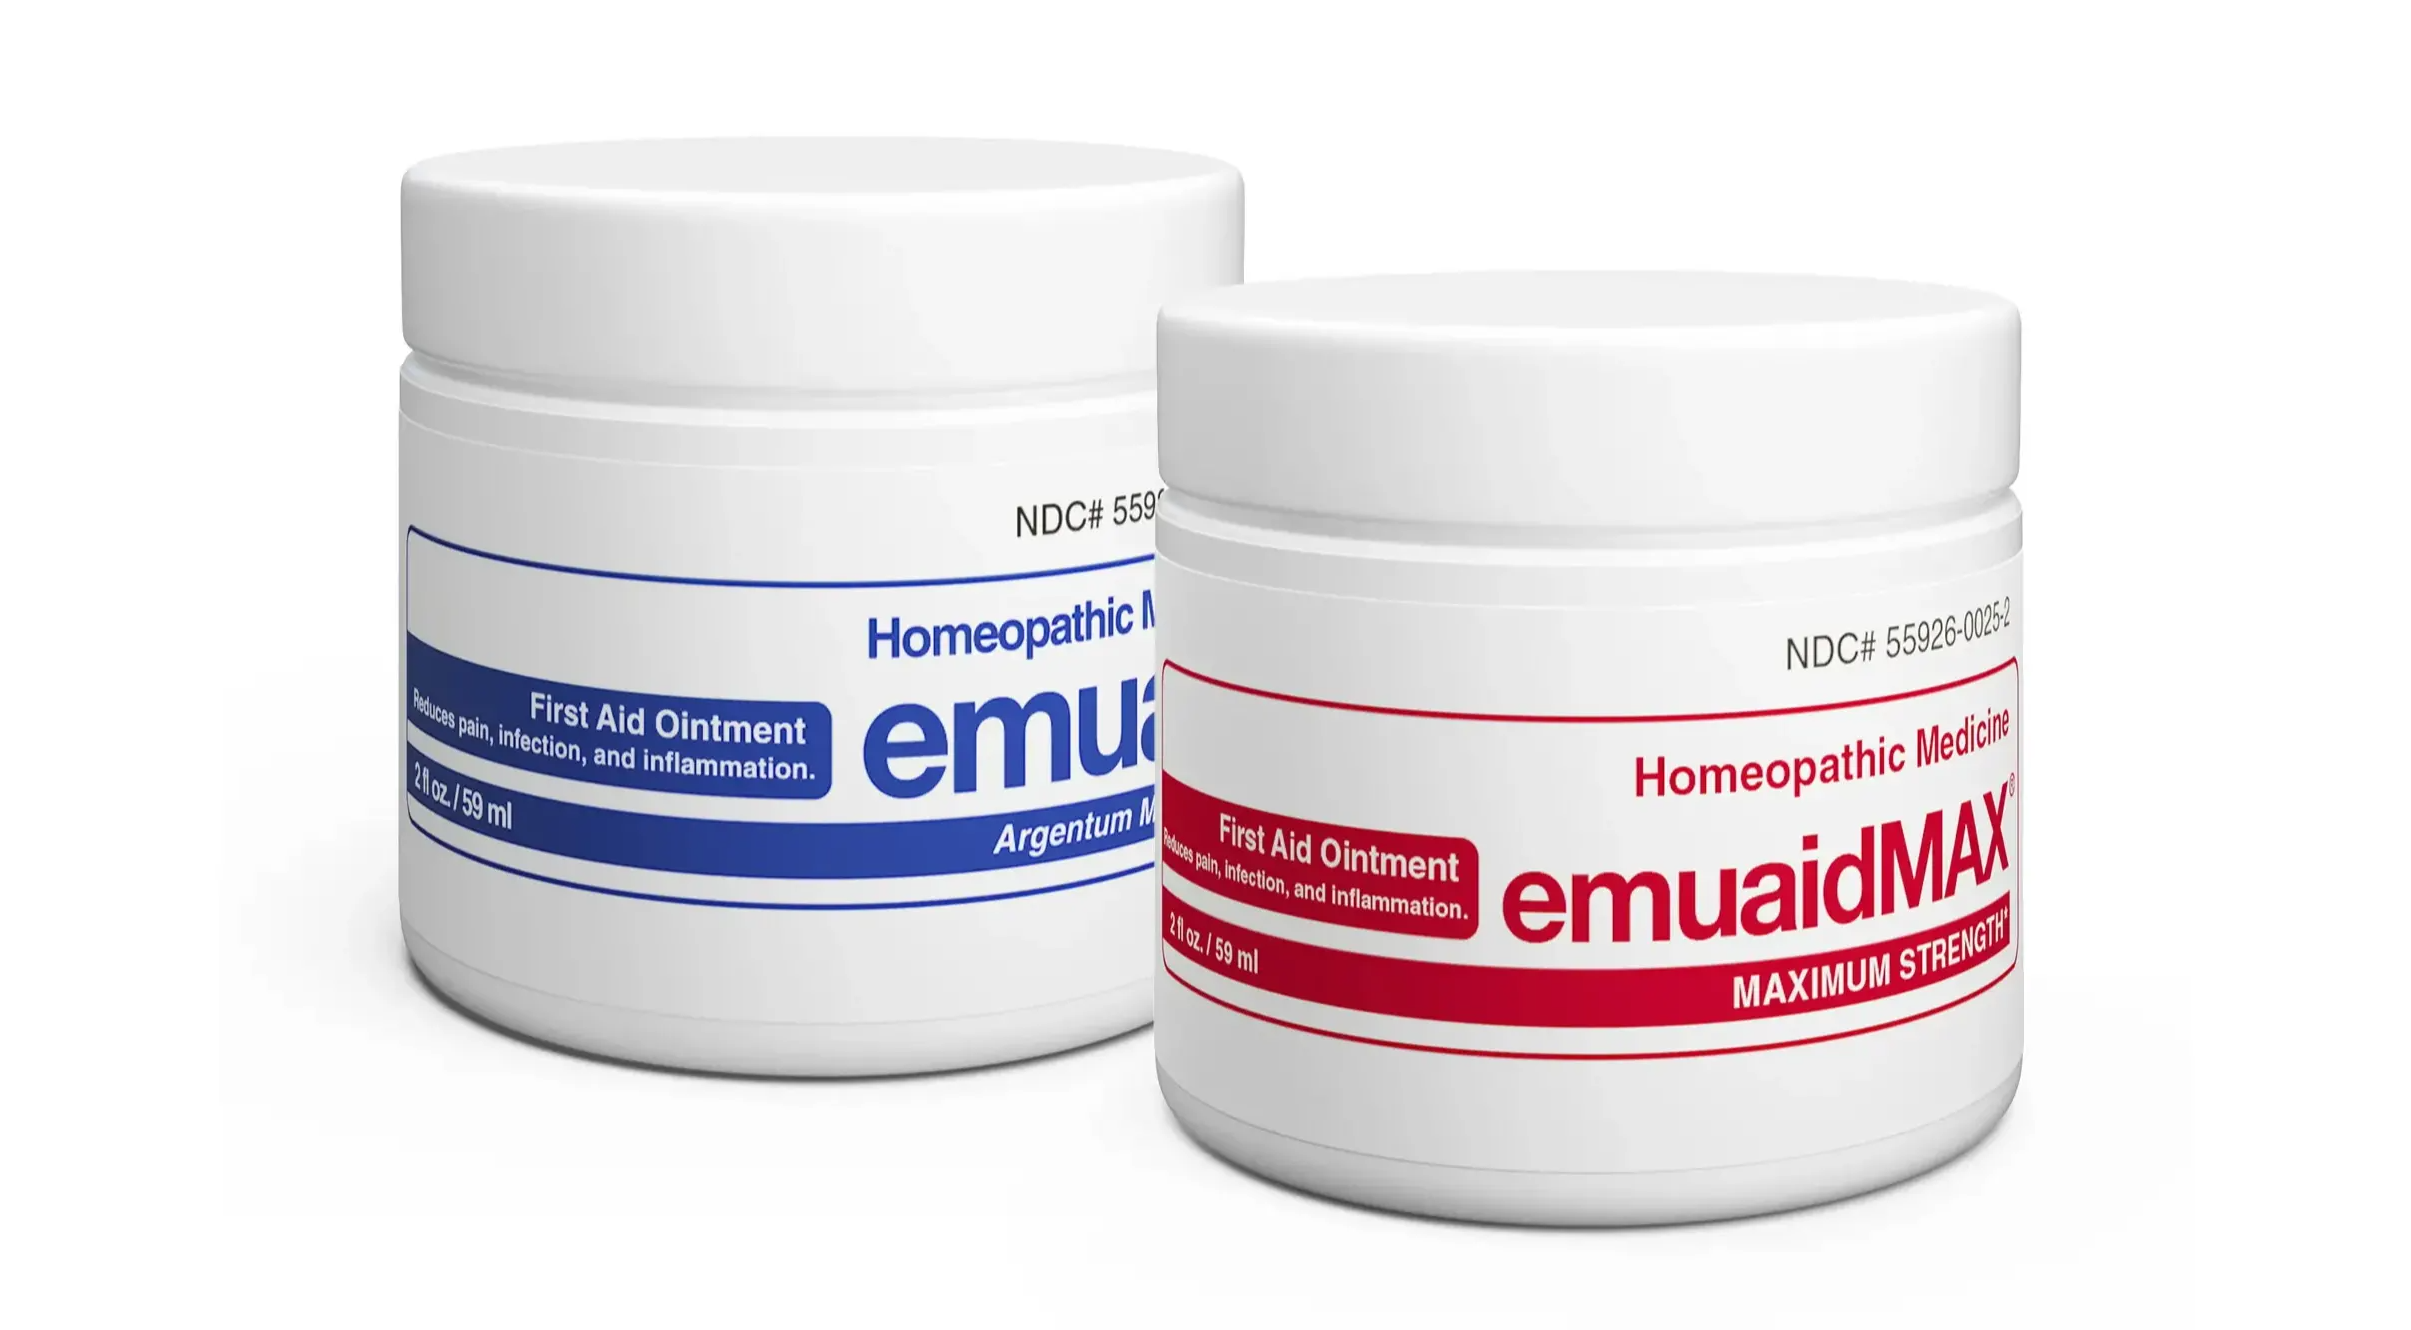 image of emuaid and emuaidmax ointments